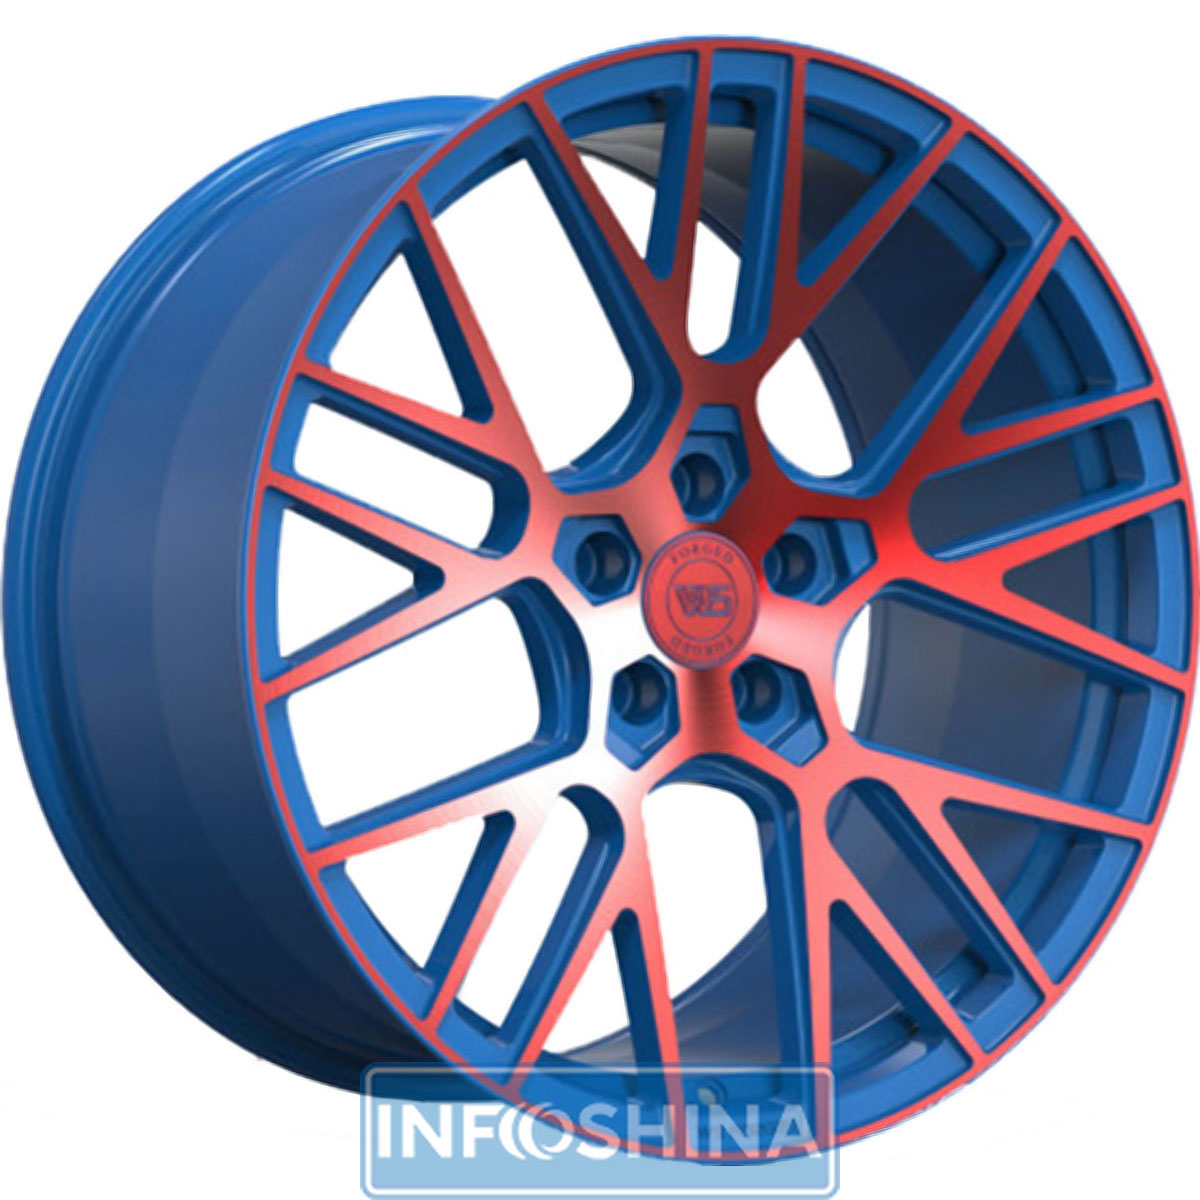 Купити диски WS Forged WS2106 Matte Blue With Red Face R20 W10.5 PCD5x114.3 ET45 DIA70.5